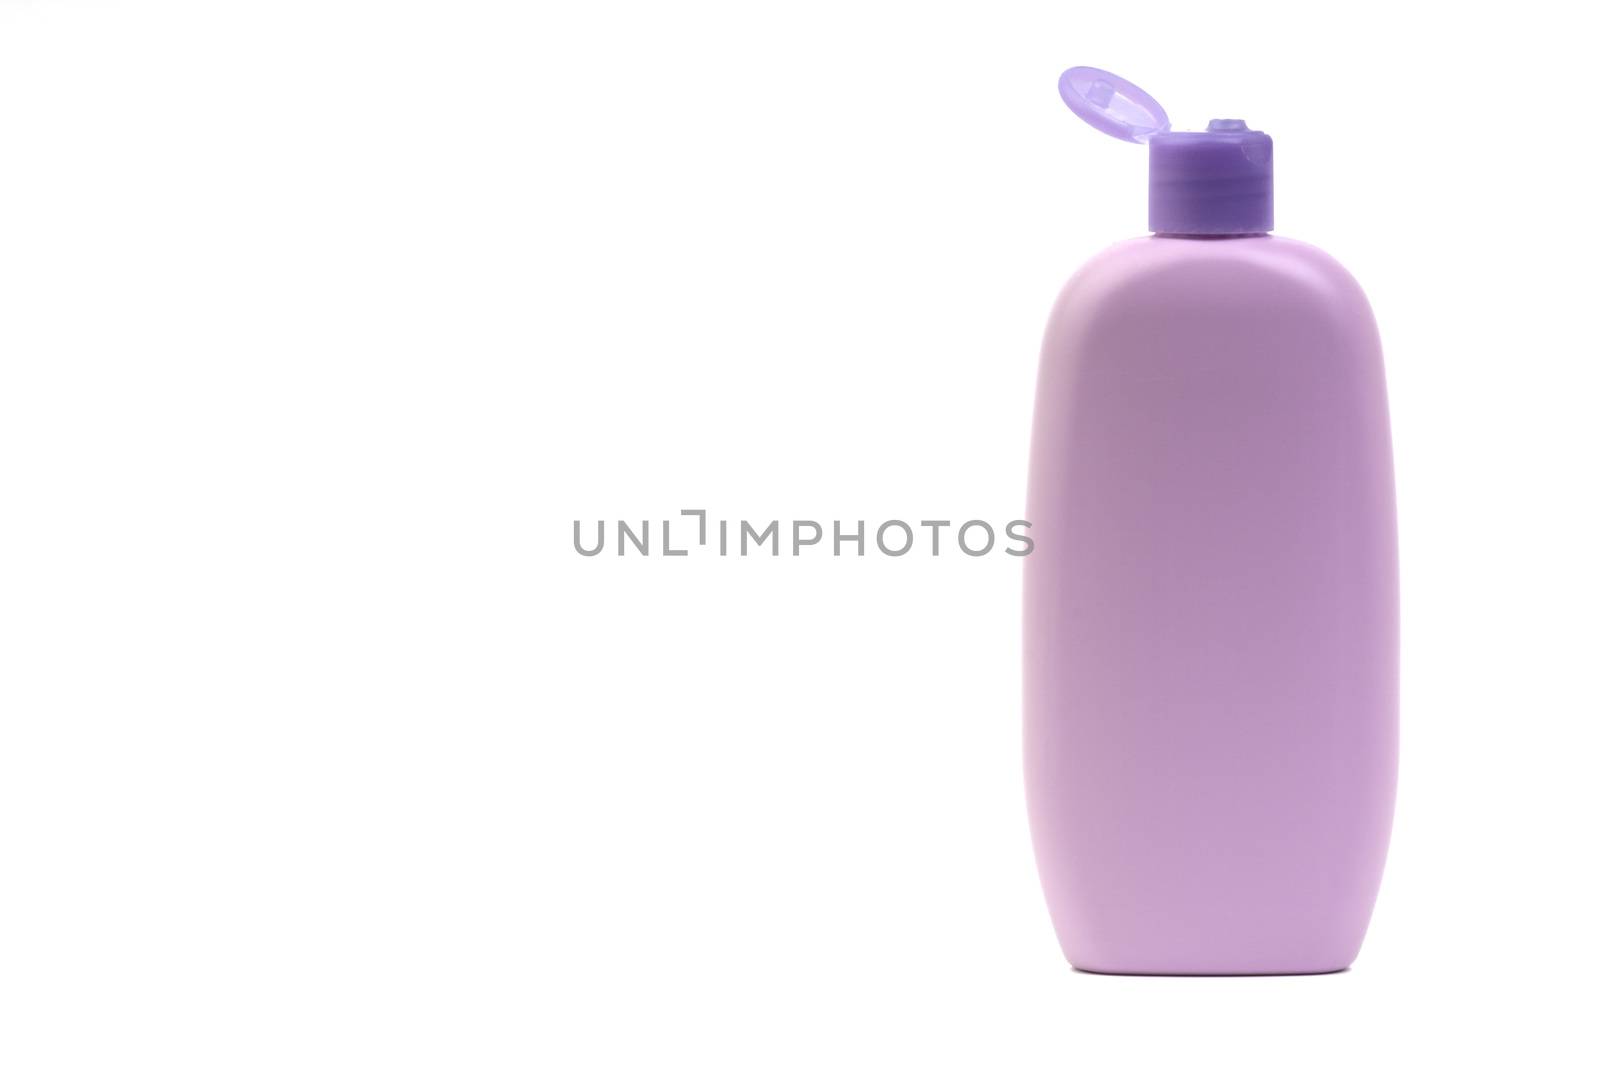 Baby lotion or shampoo bottle isolated on white background. Healthcare and business concept